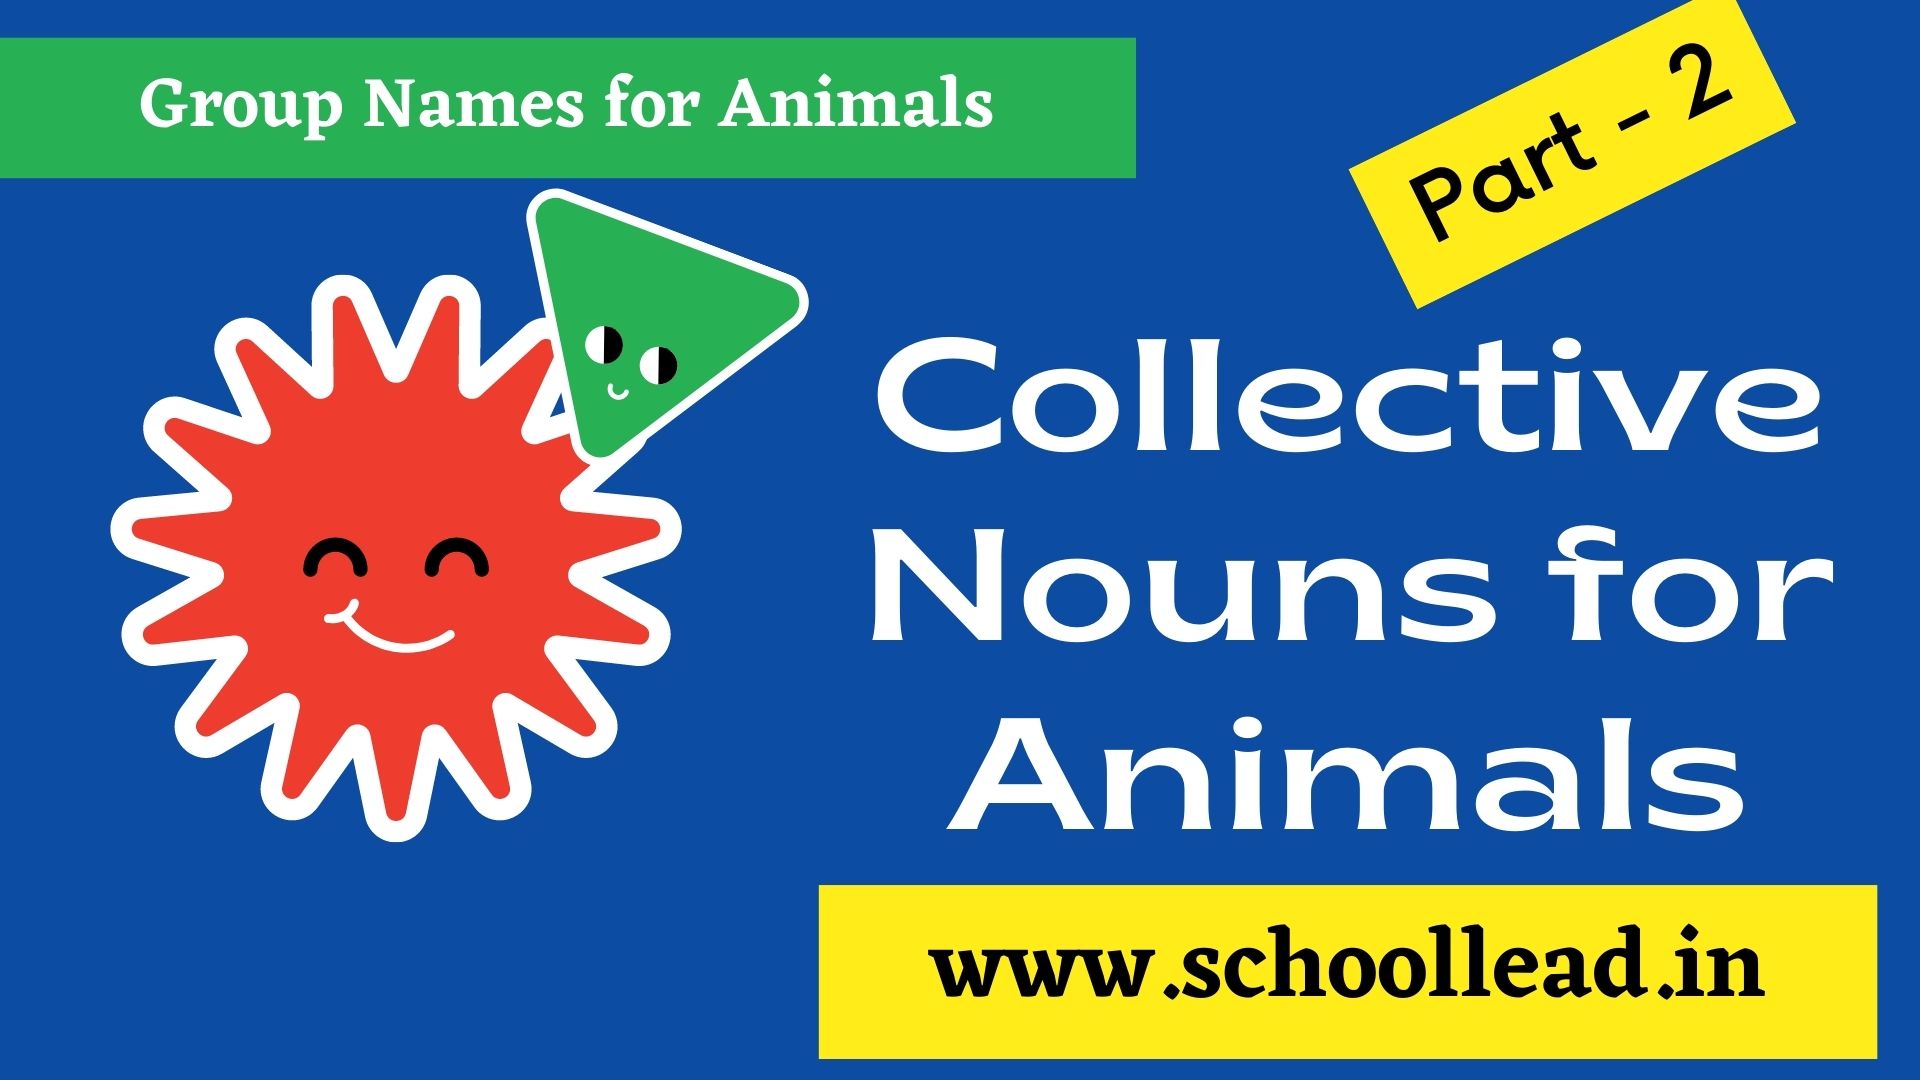 Collective Nouns for Animals